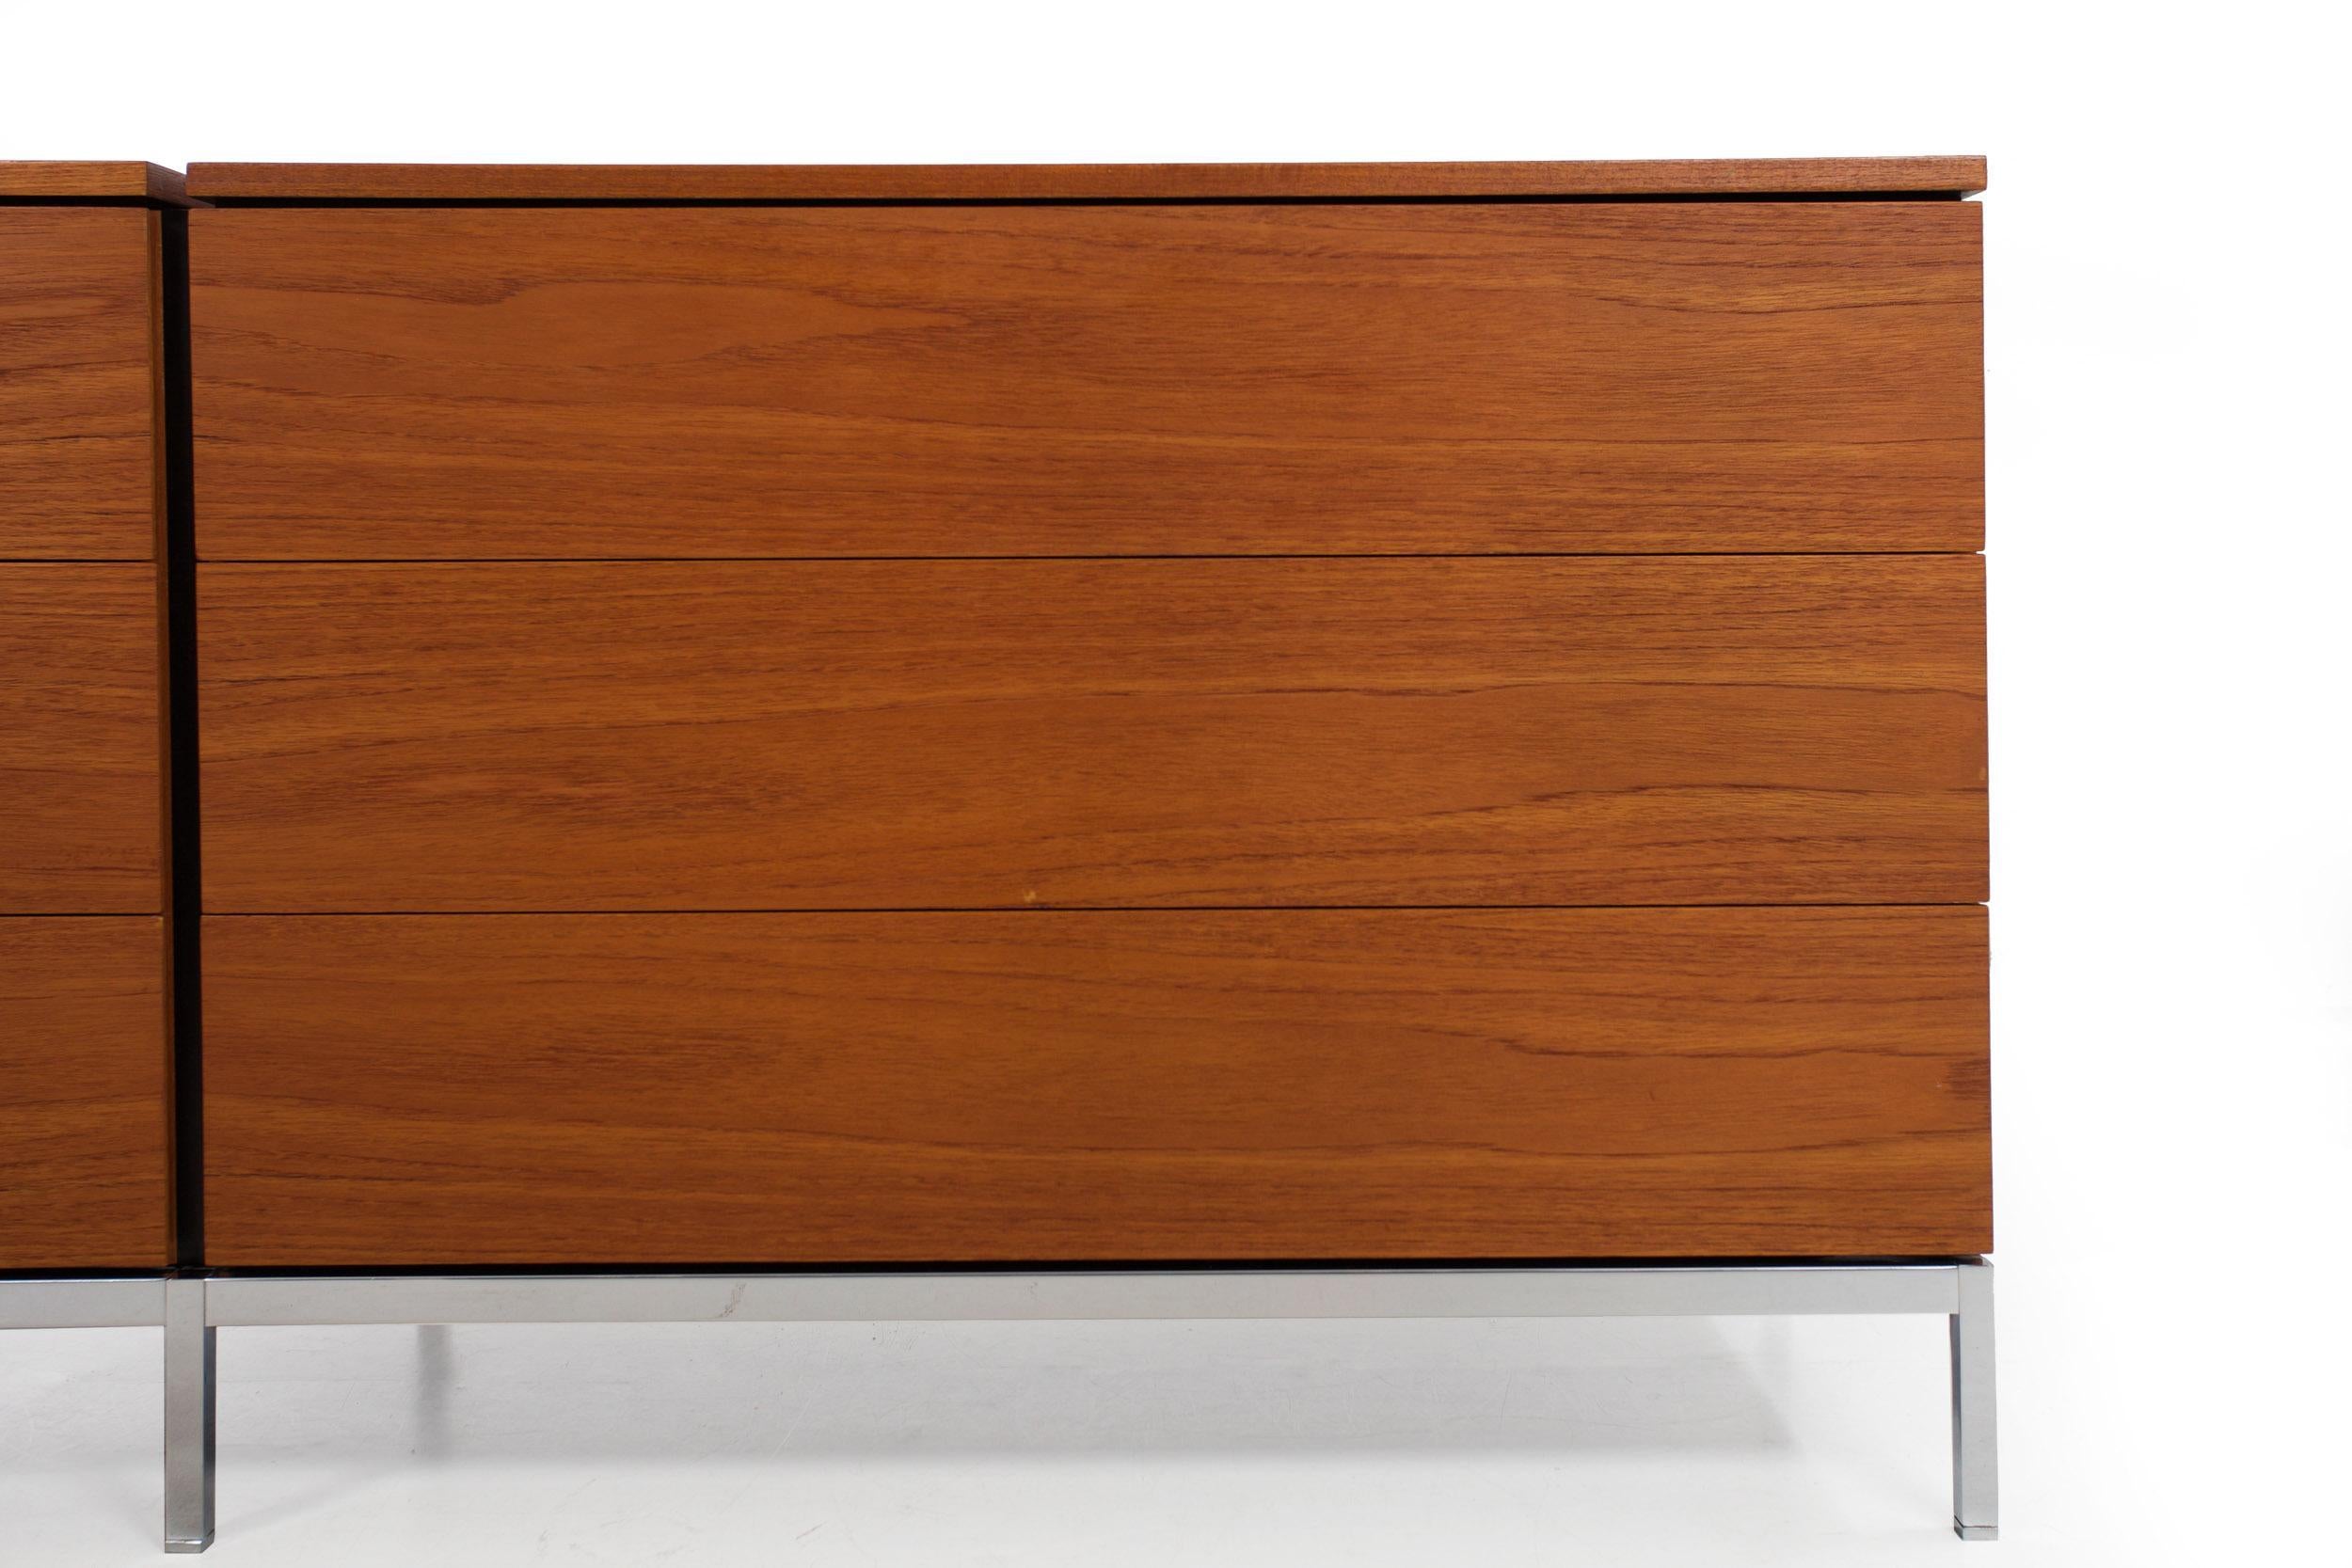 Knoll Mid-Century Modern Teak and Chrome Double Chest Credenza, circa 1970 For Sale 4